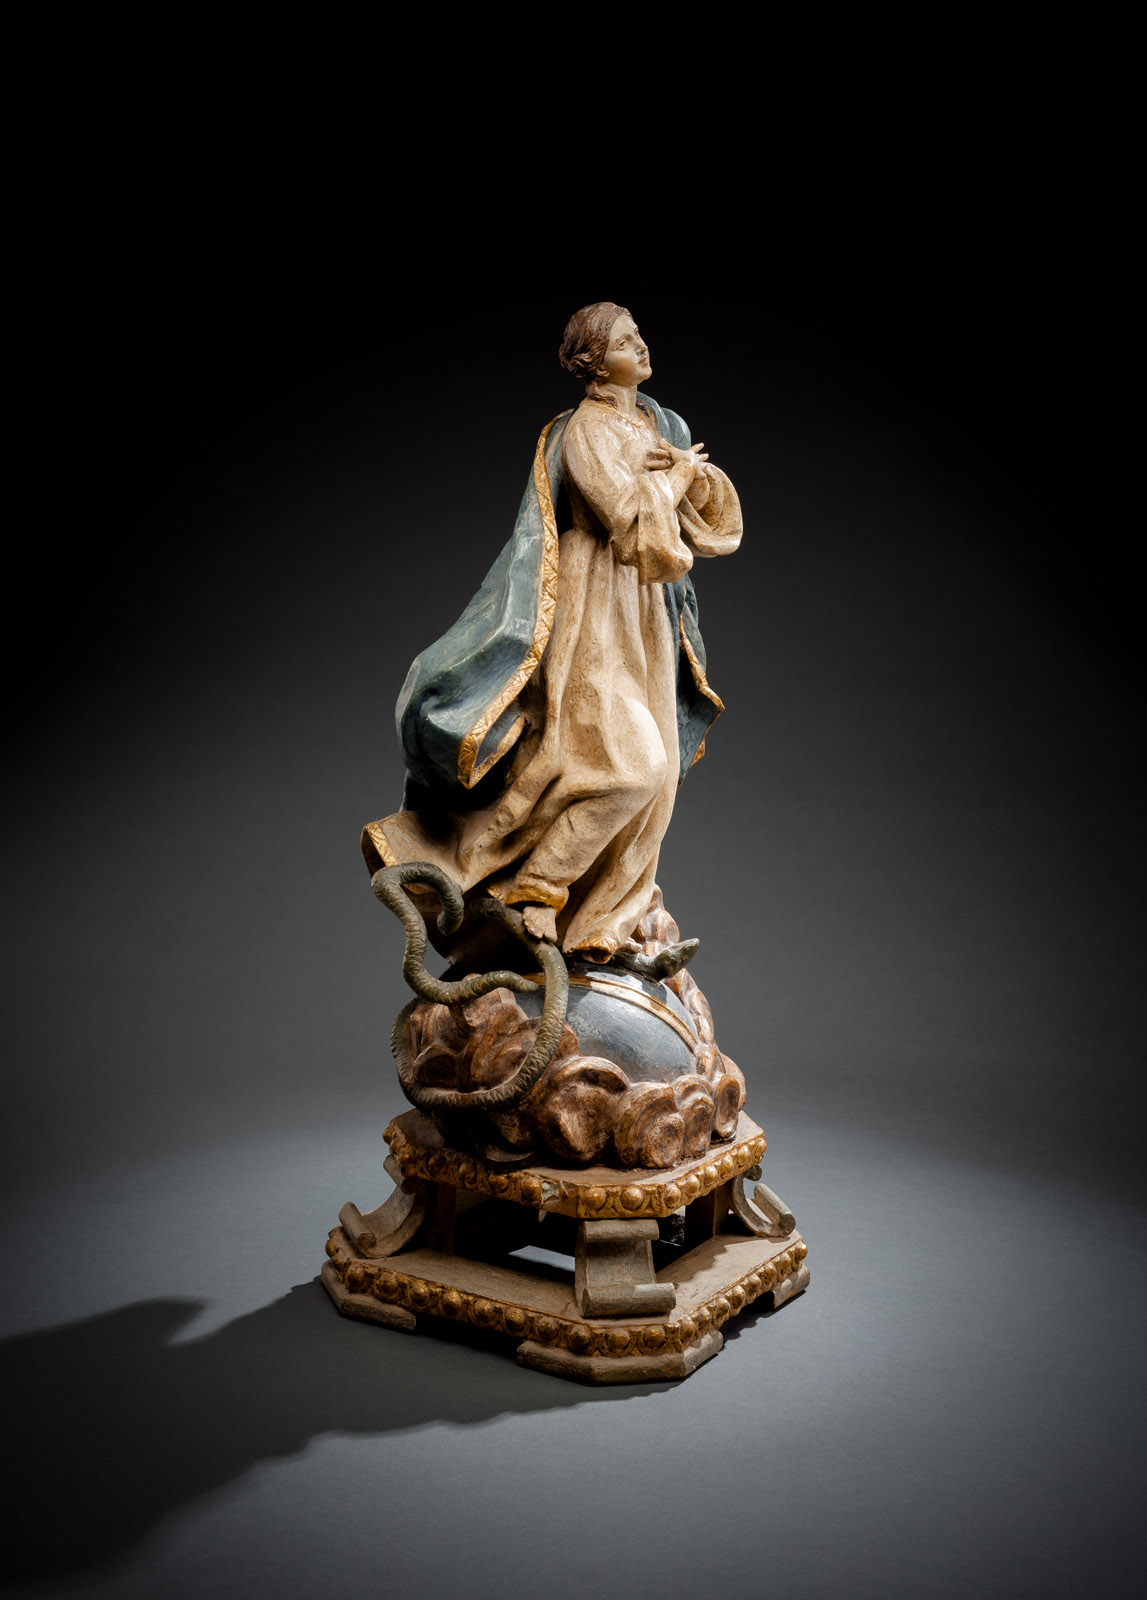 A FINE BAROQUE SCULPTURE OF ST. MARY IMMACULATE - Image 2 of 5